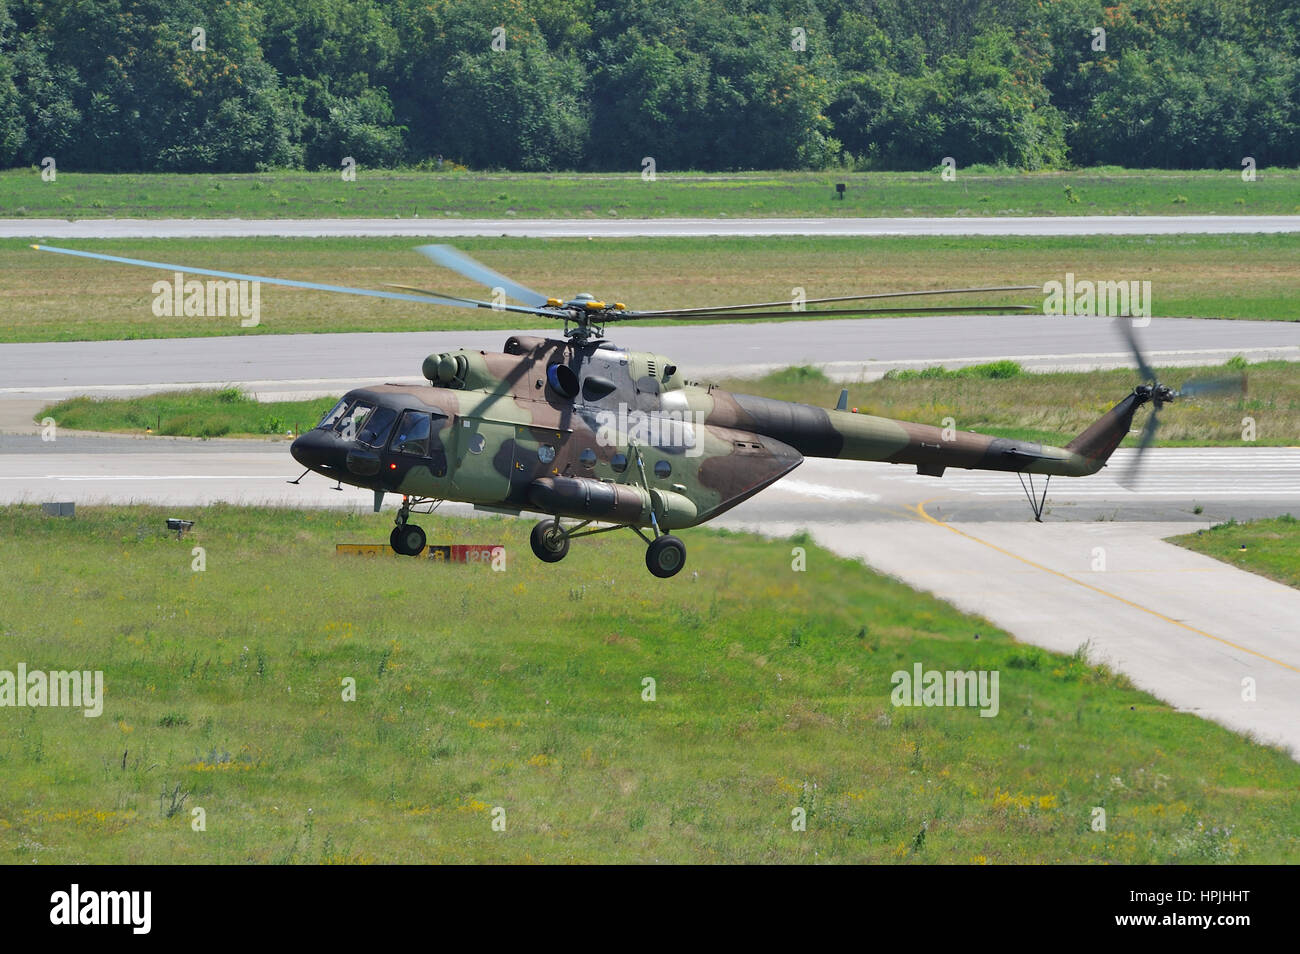 Brand new unmarked Russian Helicopters Mil Mi-17V5 multi-purpose helicopter in flight during delivery to Serbian Armed Forces Stock Photo